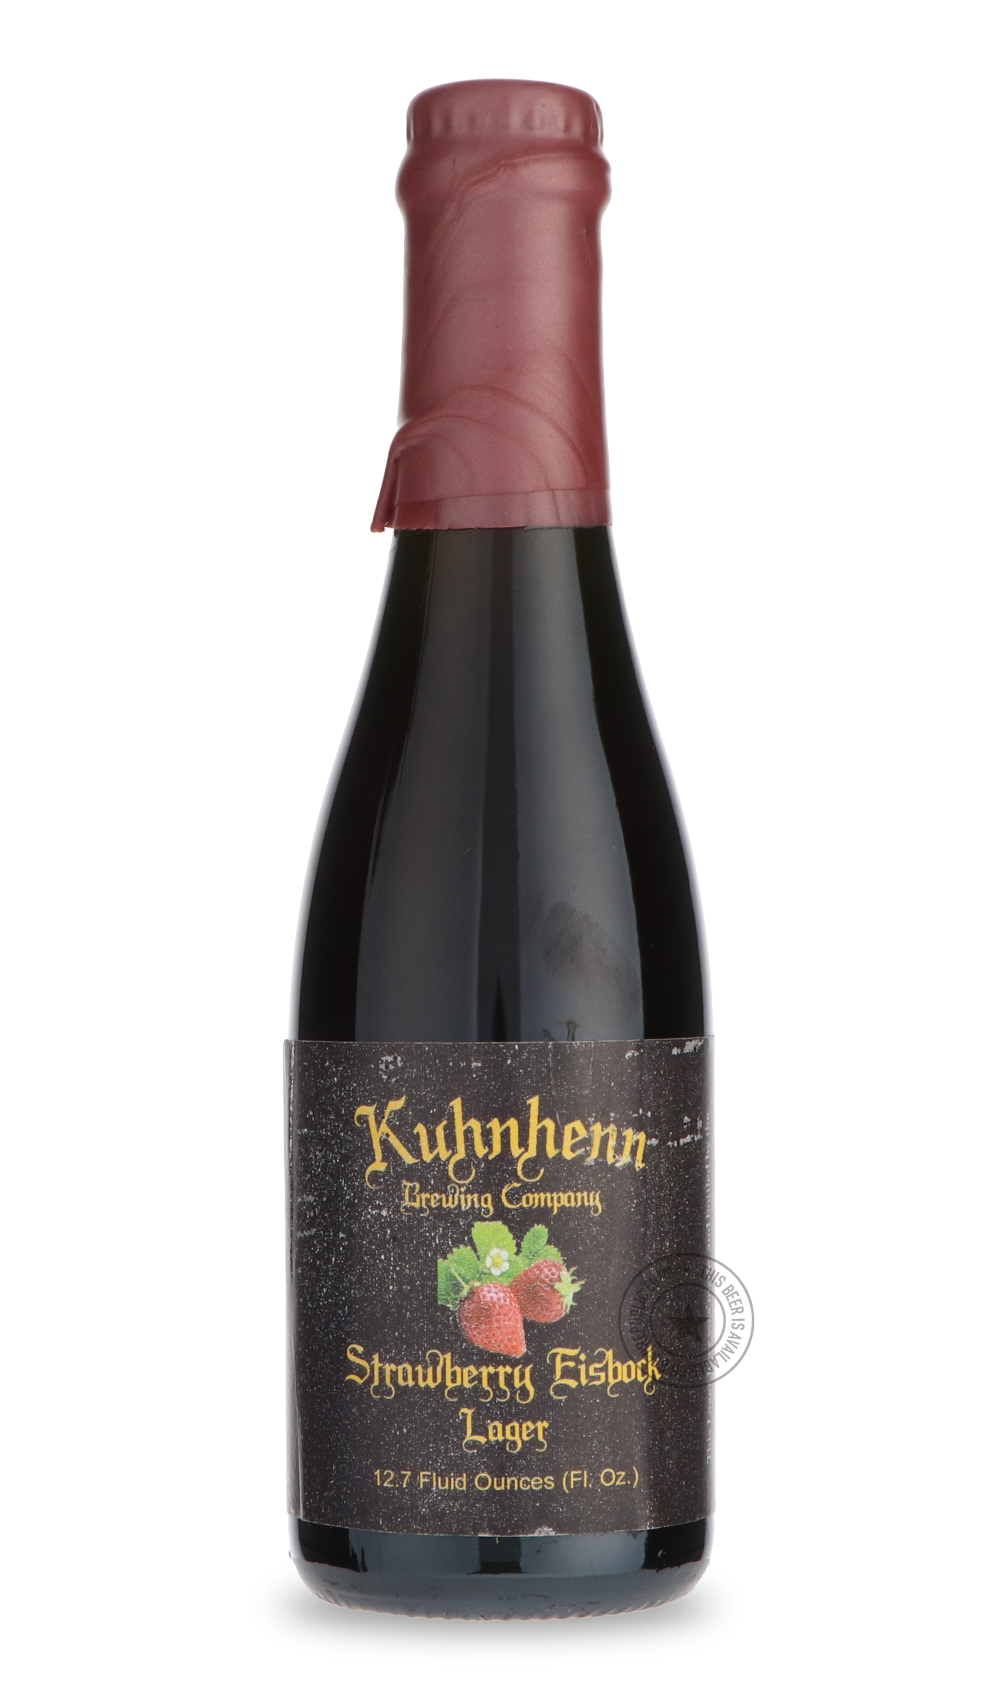 -Kuhnhenn- Strawberry Eisbock-Brown & Dark- Only @ Beer Republic - The best online beer store for American & Canadian craft beer - Buy beer online from the USA and Canada - Bier online kopen - Amerikaans bier kopen - Craft beer store - Craft beer kopen - Amerikanisch bier kaufen - Bier online kaufen - Acheter biere online - IPA - Stout - Porter - New England IPA - Hazy IPA - Imperial Stout - Barrel Aged - Barrel Aged Imperial Stout - Brown - Dark beer - Blond - Blonde - Pilsner - Lager - Wheat - Weizen - Am